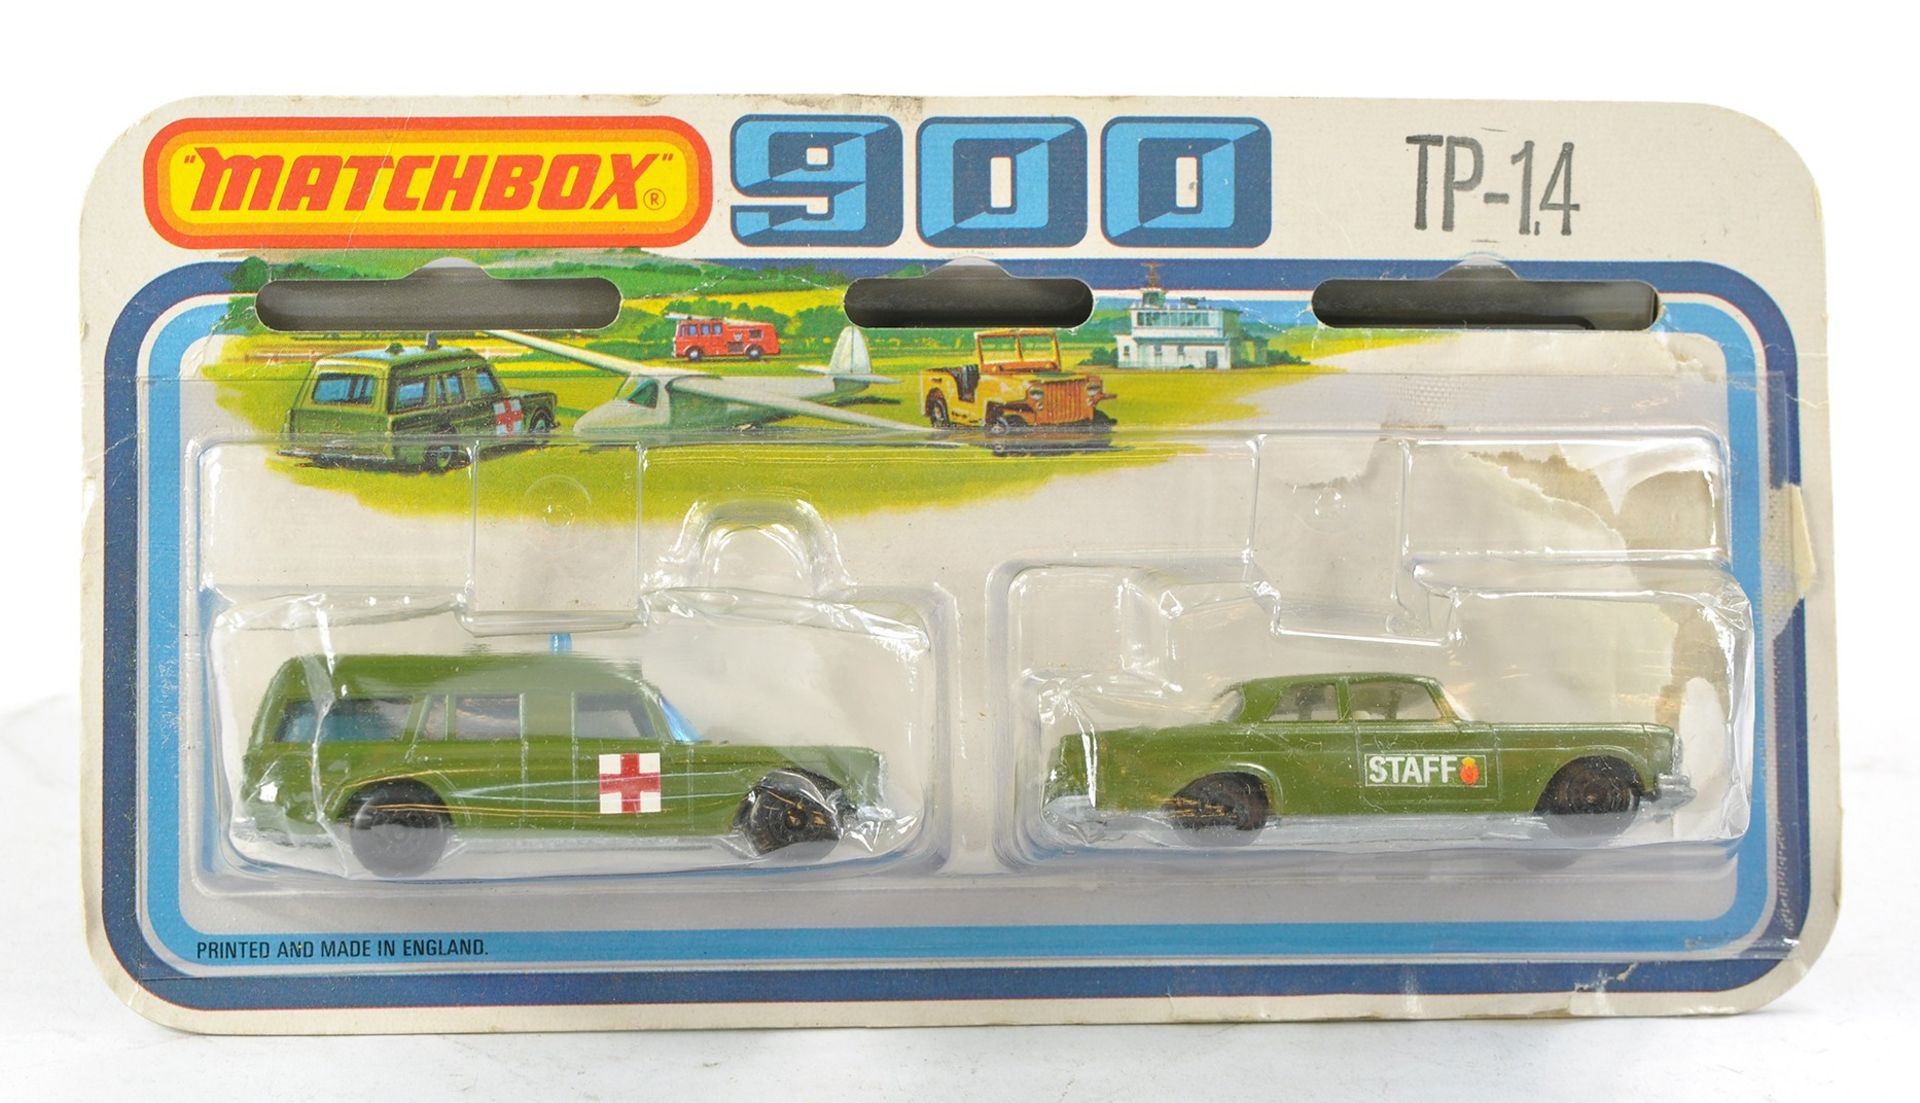 Matchbox Superfast Twin Pack comprising No. TP-14 containing No. 3c Mercedes Benz Binz Ambulance and